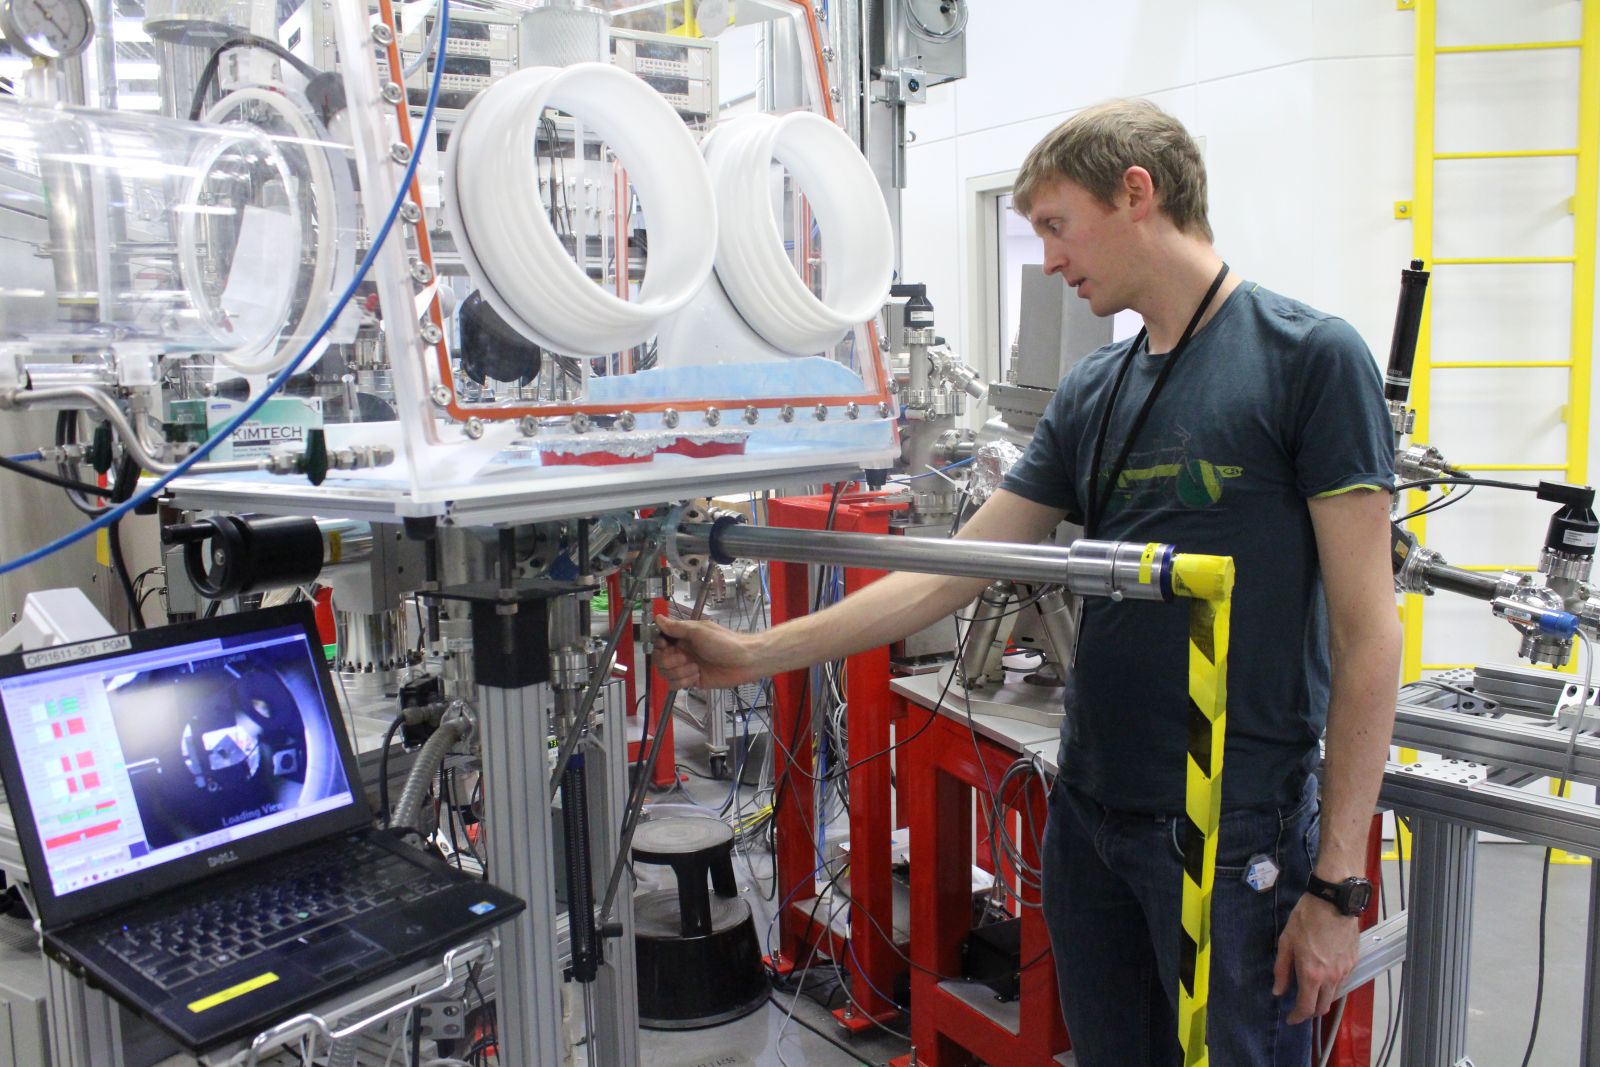 Dr. Christian Vogel using the VLS-PGM beamline to analyze a sample at the CLS.